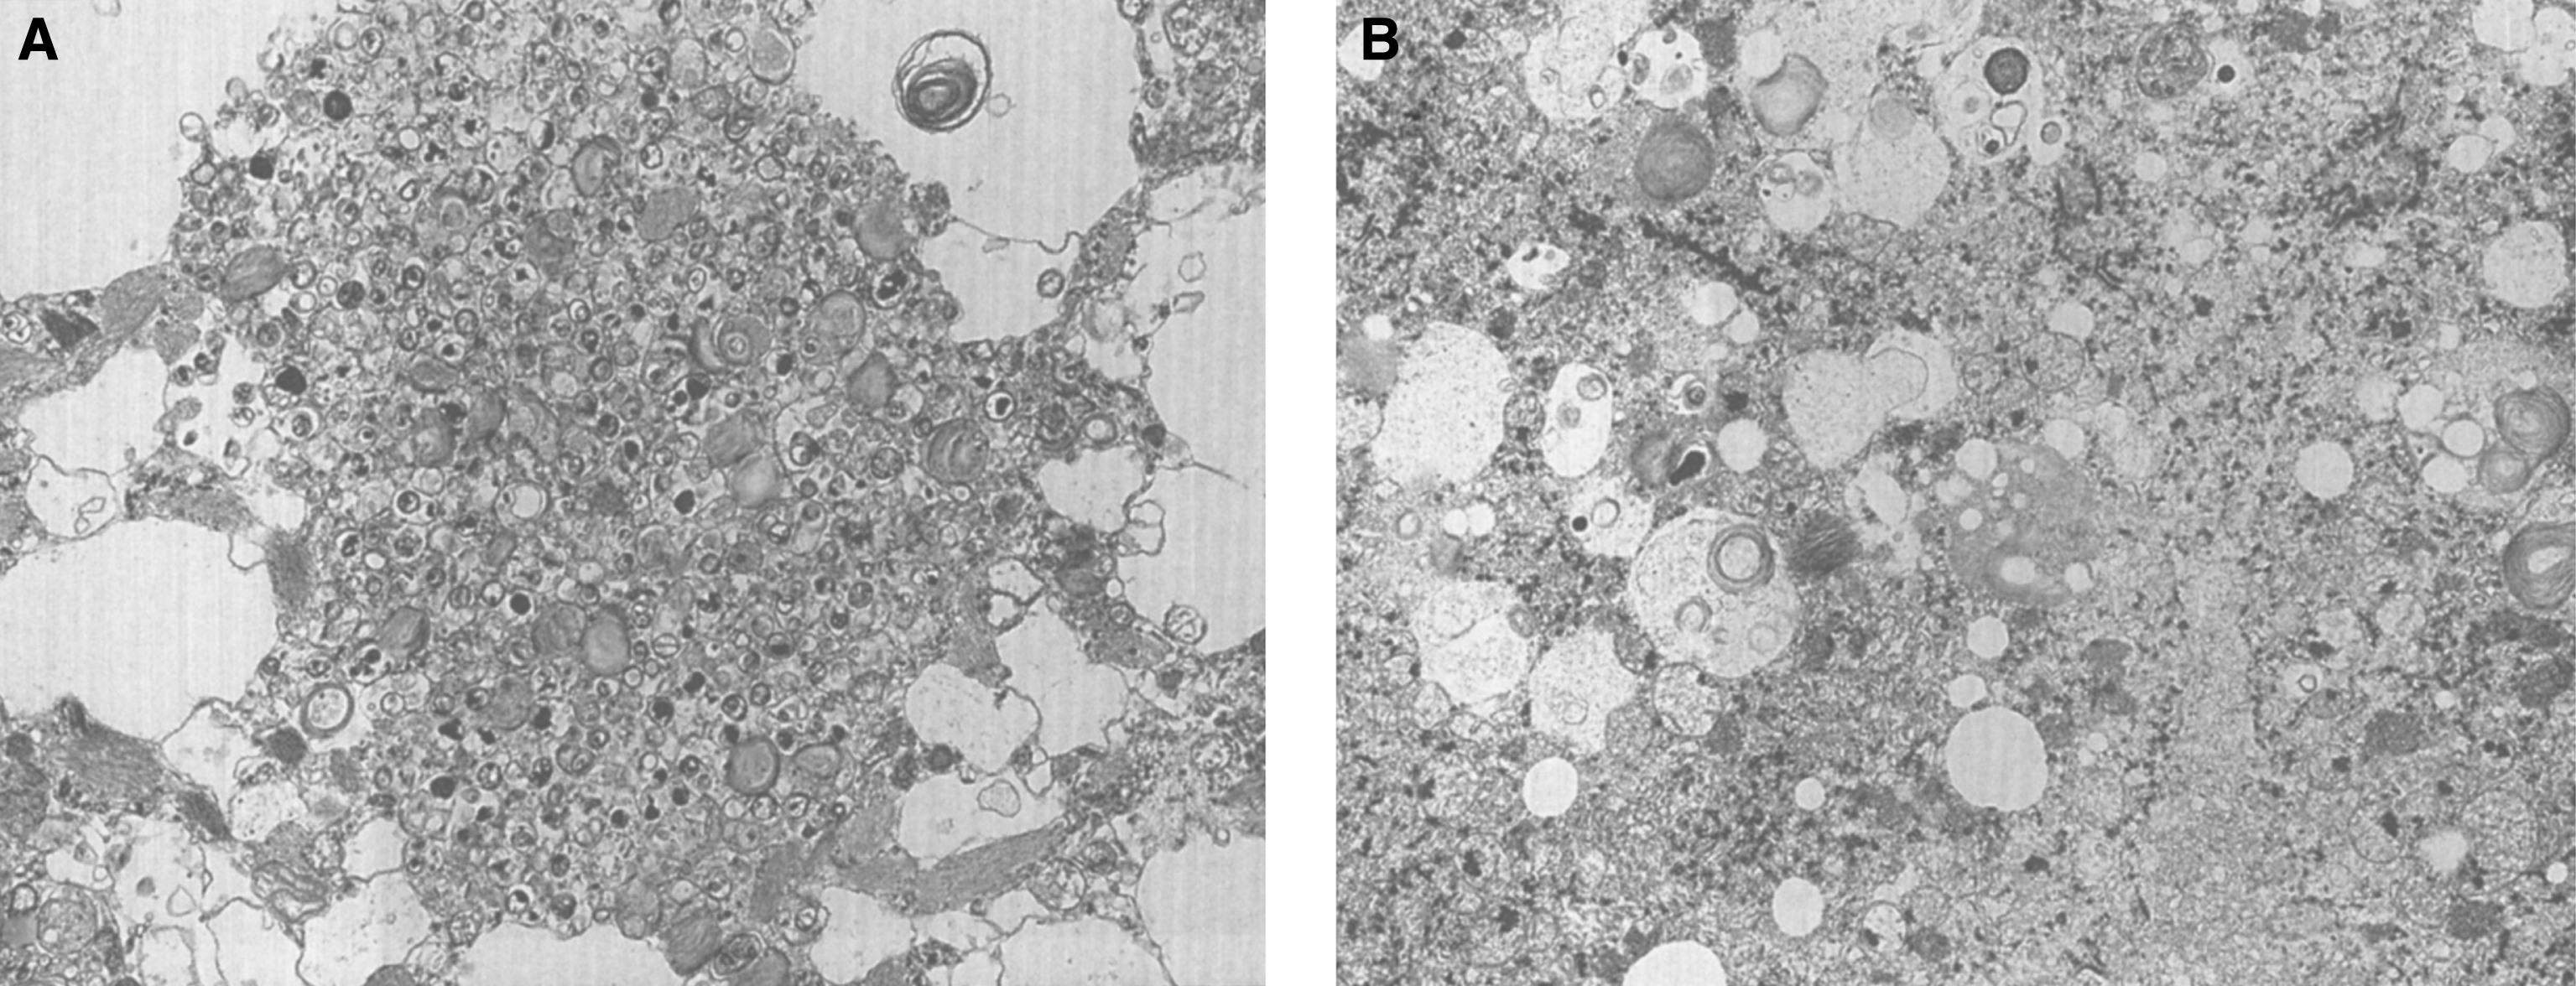 GM2 gangliosidosis type II (Sandhoff disease). Electron micrograph of (A) cerebral cortex showing inclusions of electron-dense profiles with concentric laminations, and (B) liver containing intracellular concentric laminations within hepatocytes.